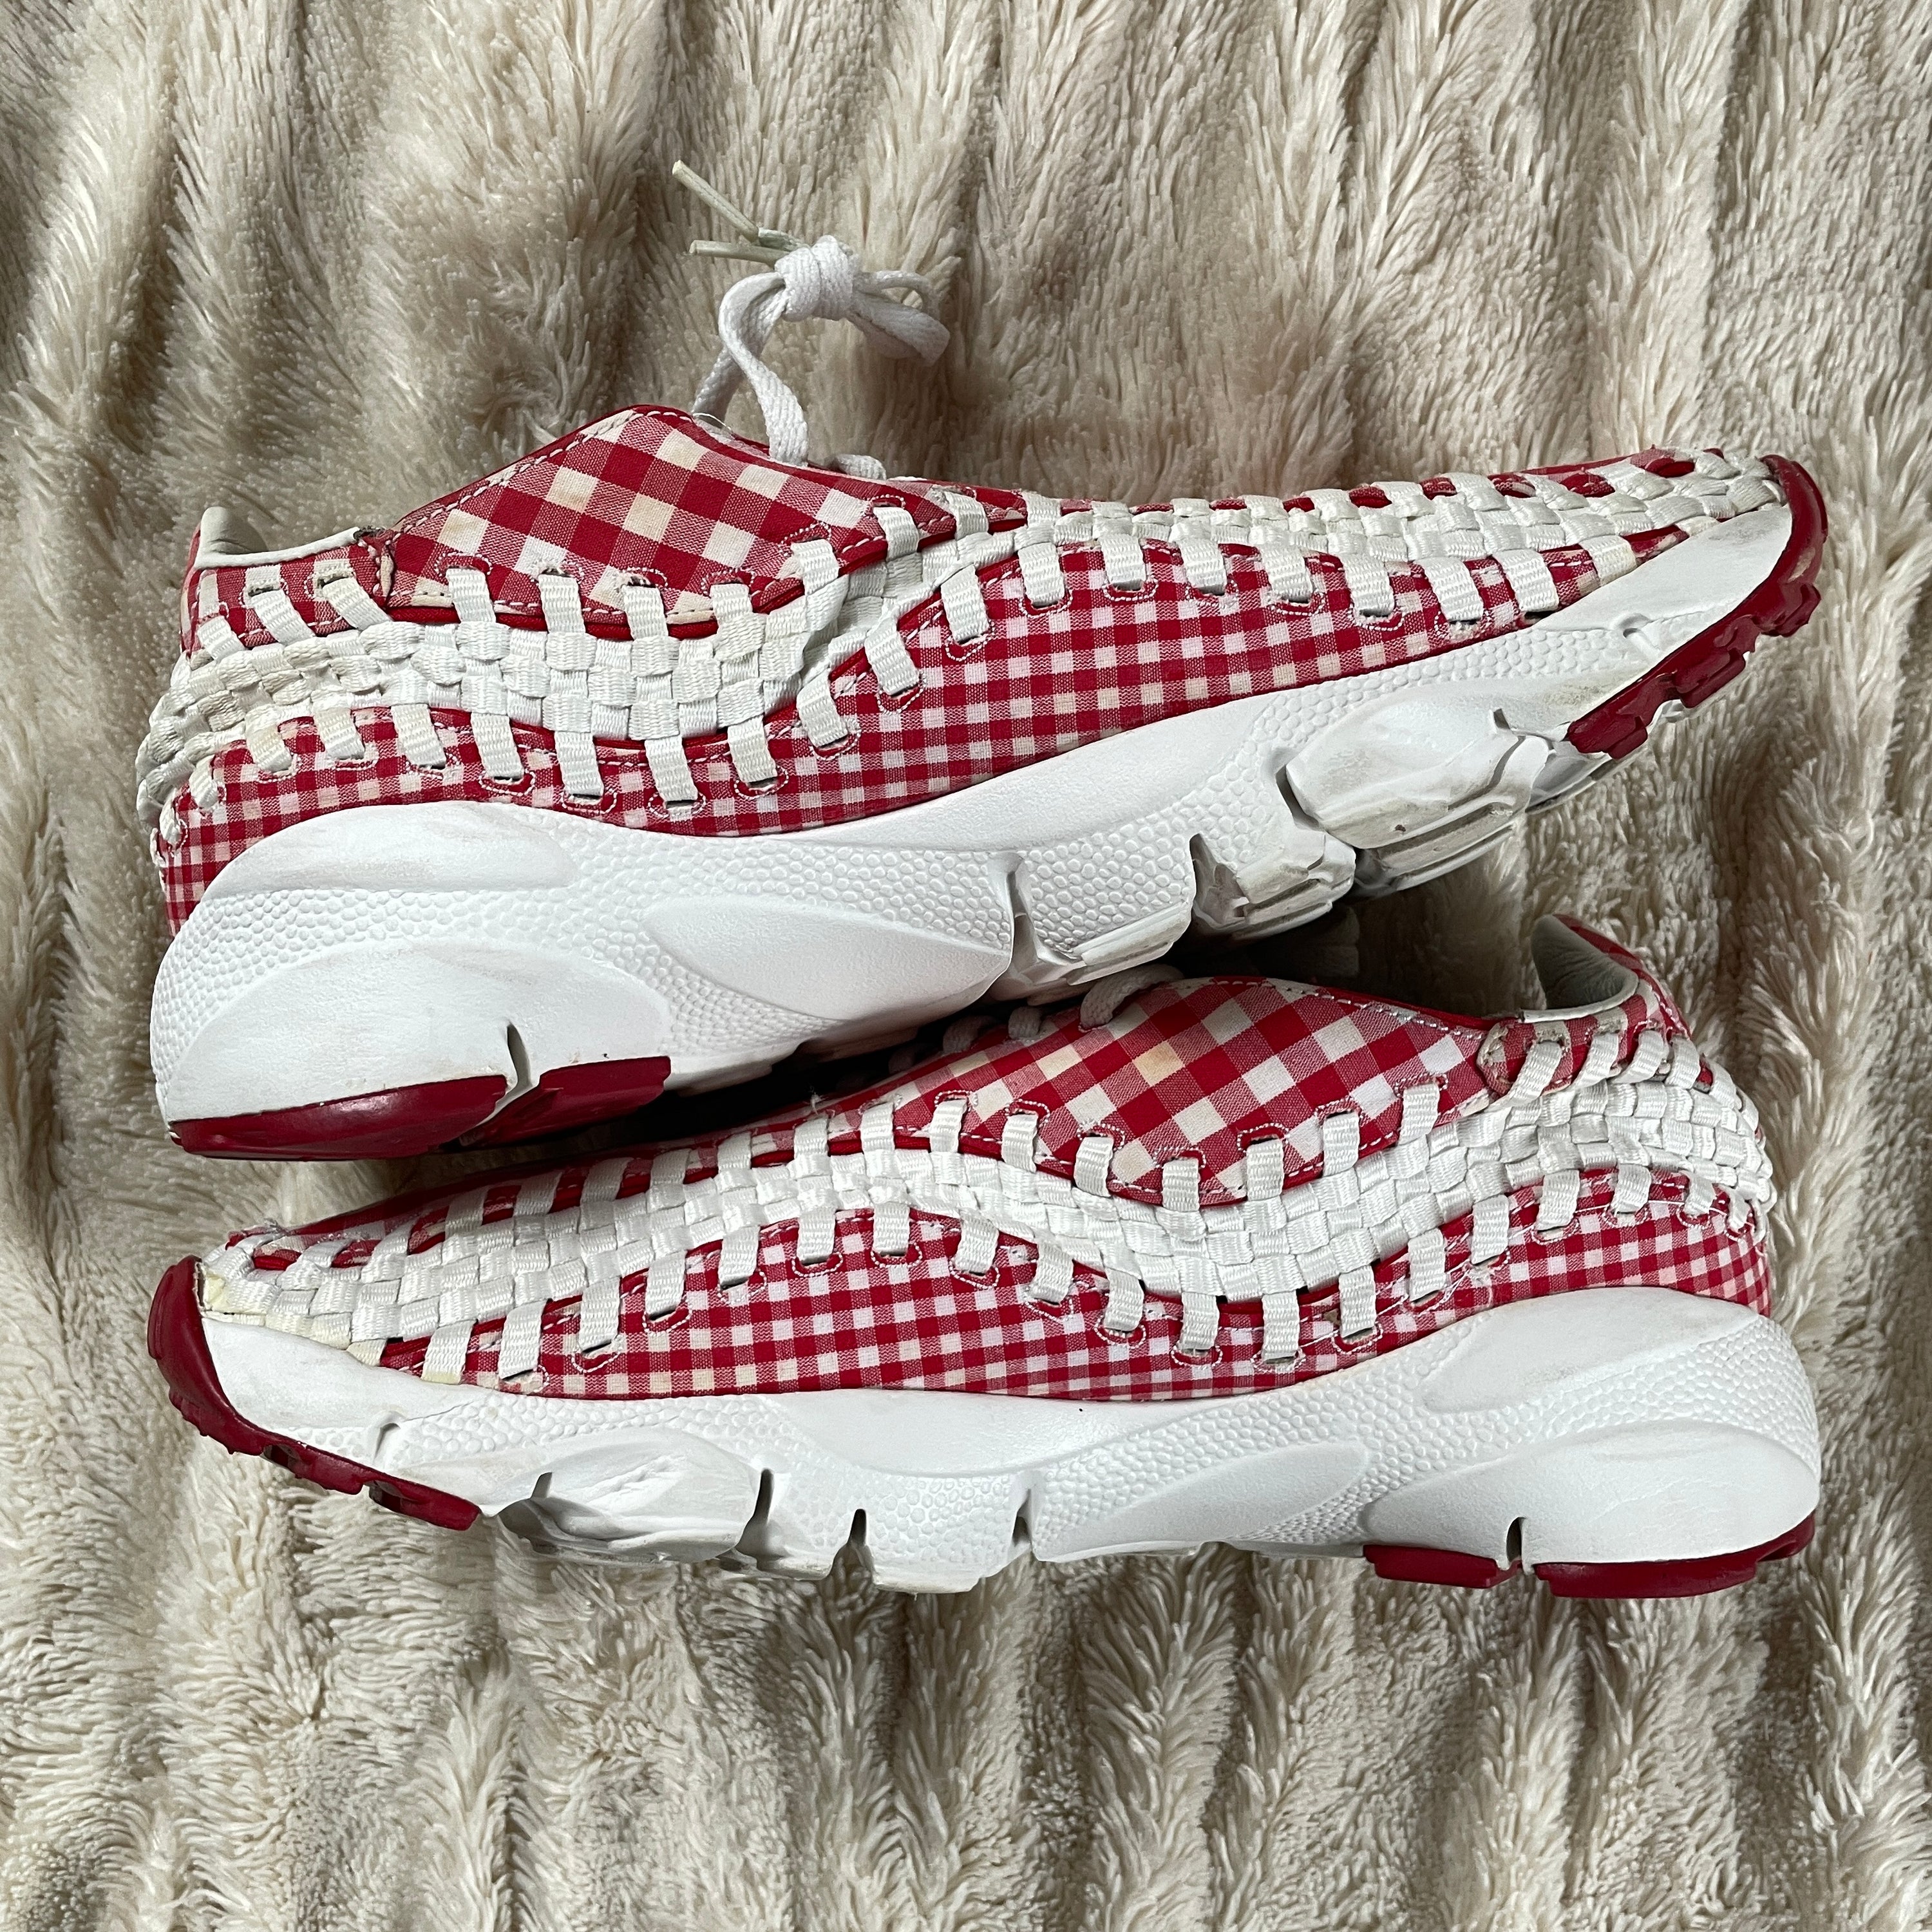 US 10.5 - NIKE AIR FOOTSCAPE WOVEN MOTION "PICNIC' [2010]